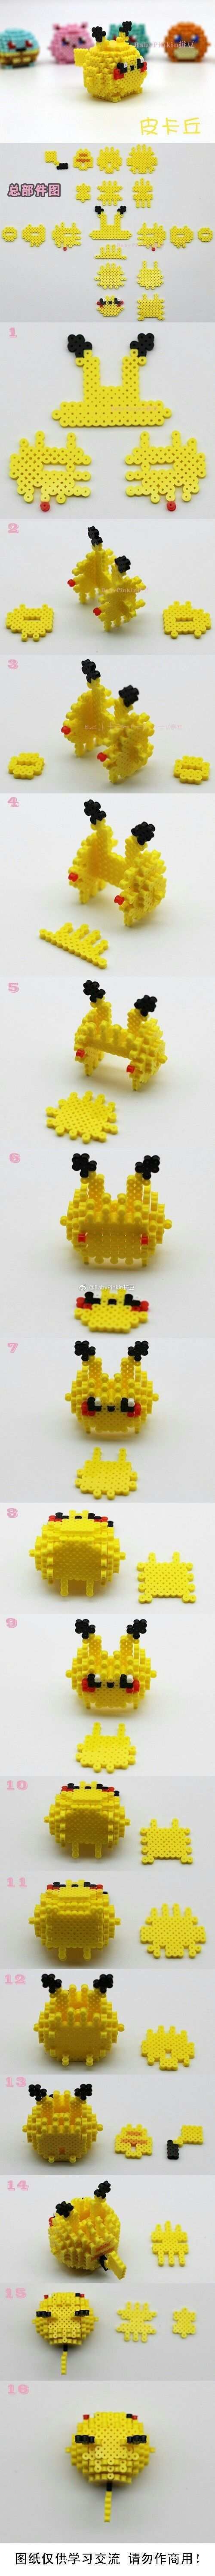 Pin By Pokemon On Project 1 Diy Perler Beads Perler Beads Pokemon Perler Beads